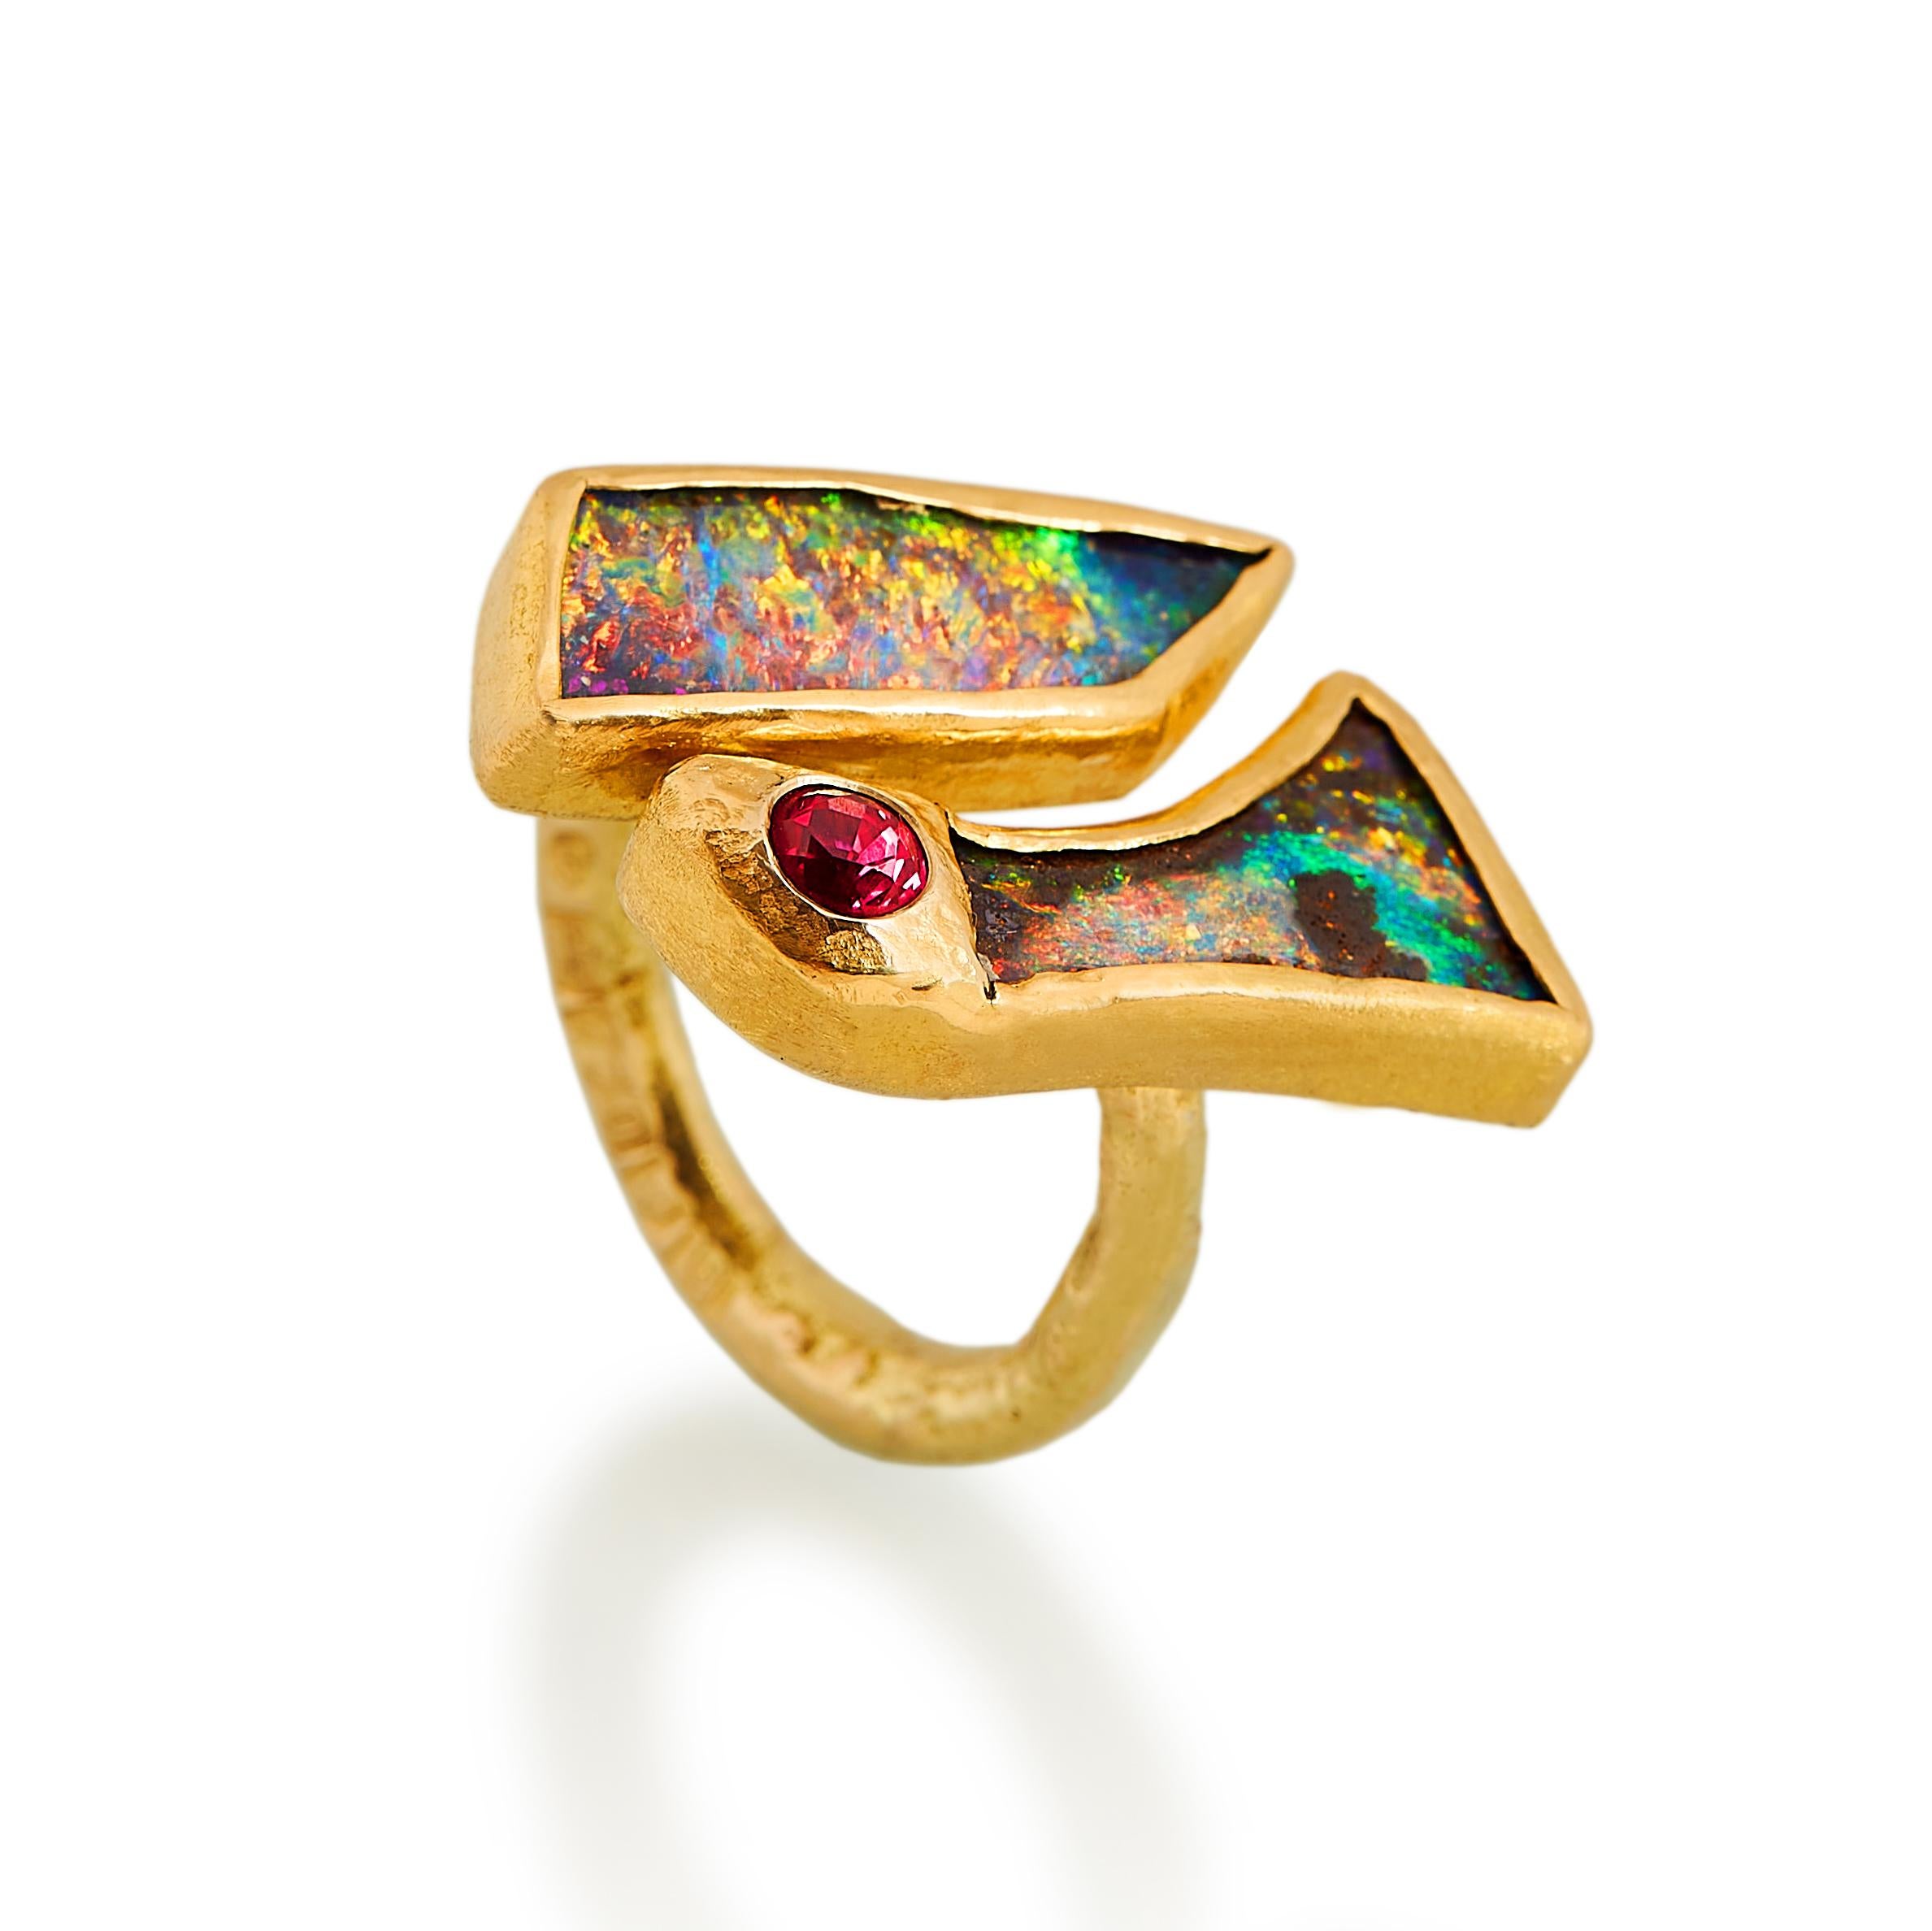 This beautiful handmade double boulder opal ring is multicoloured and full of light. The small bright burgundy spinel enhances some of gorgeous red colours in the other stones. Set in rich, textured 22 karat gold, the opals sit on a robust band of